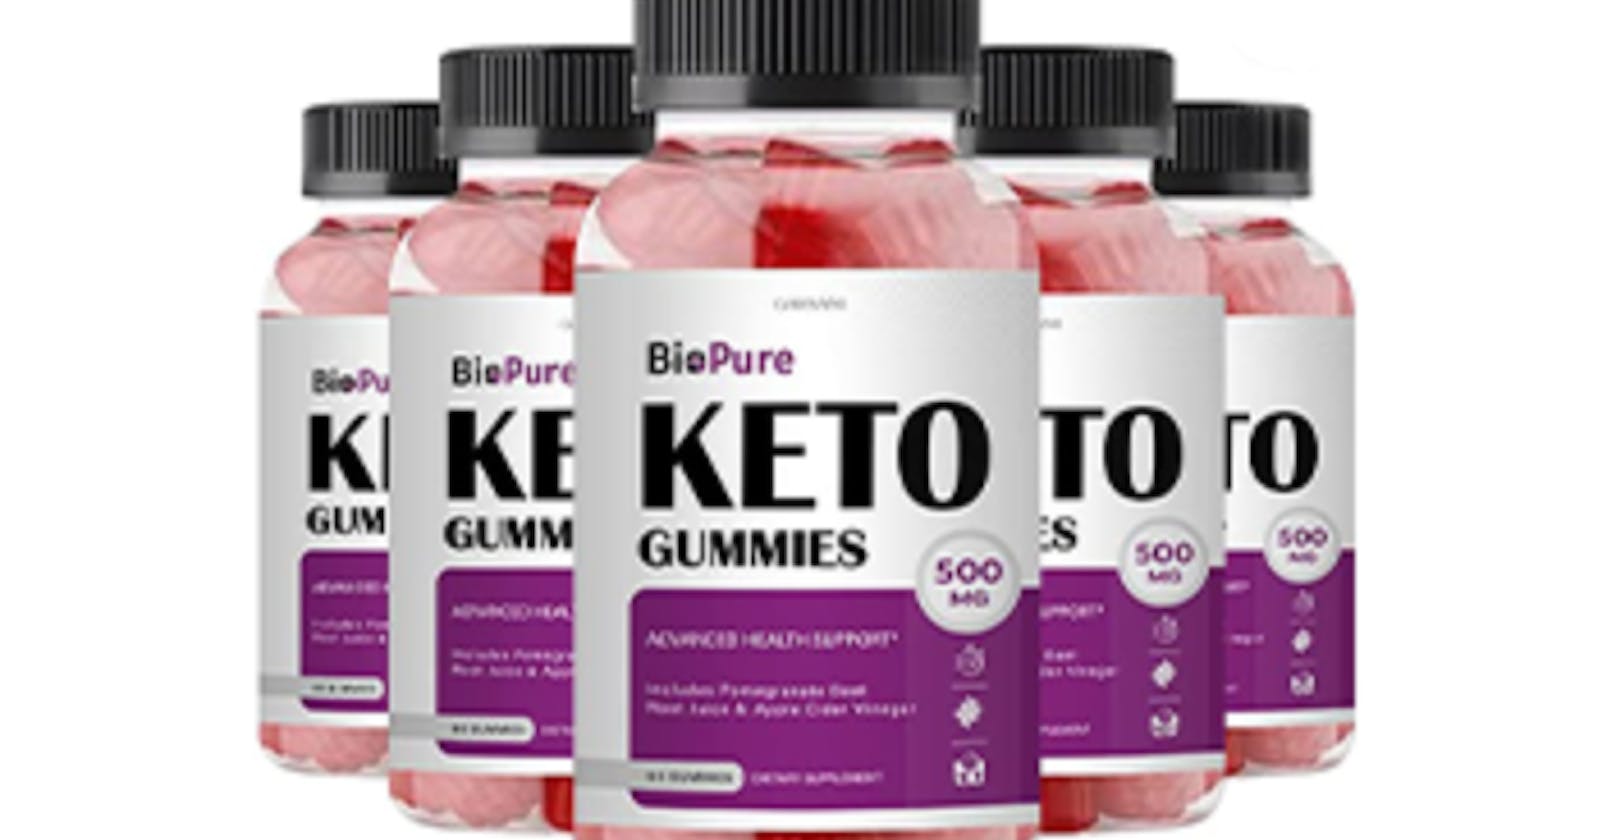 Biopure Keto Gummies Review & Price, For Weight Loss Reviews?